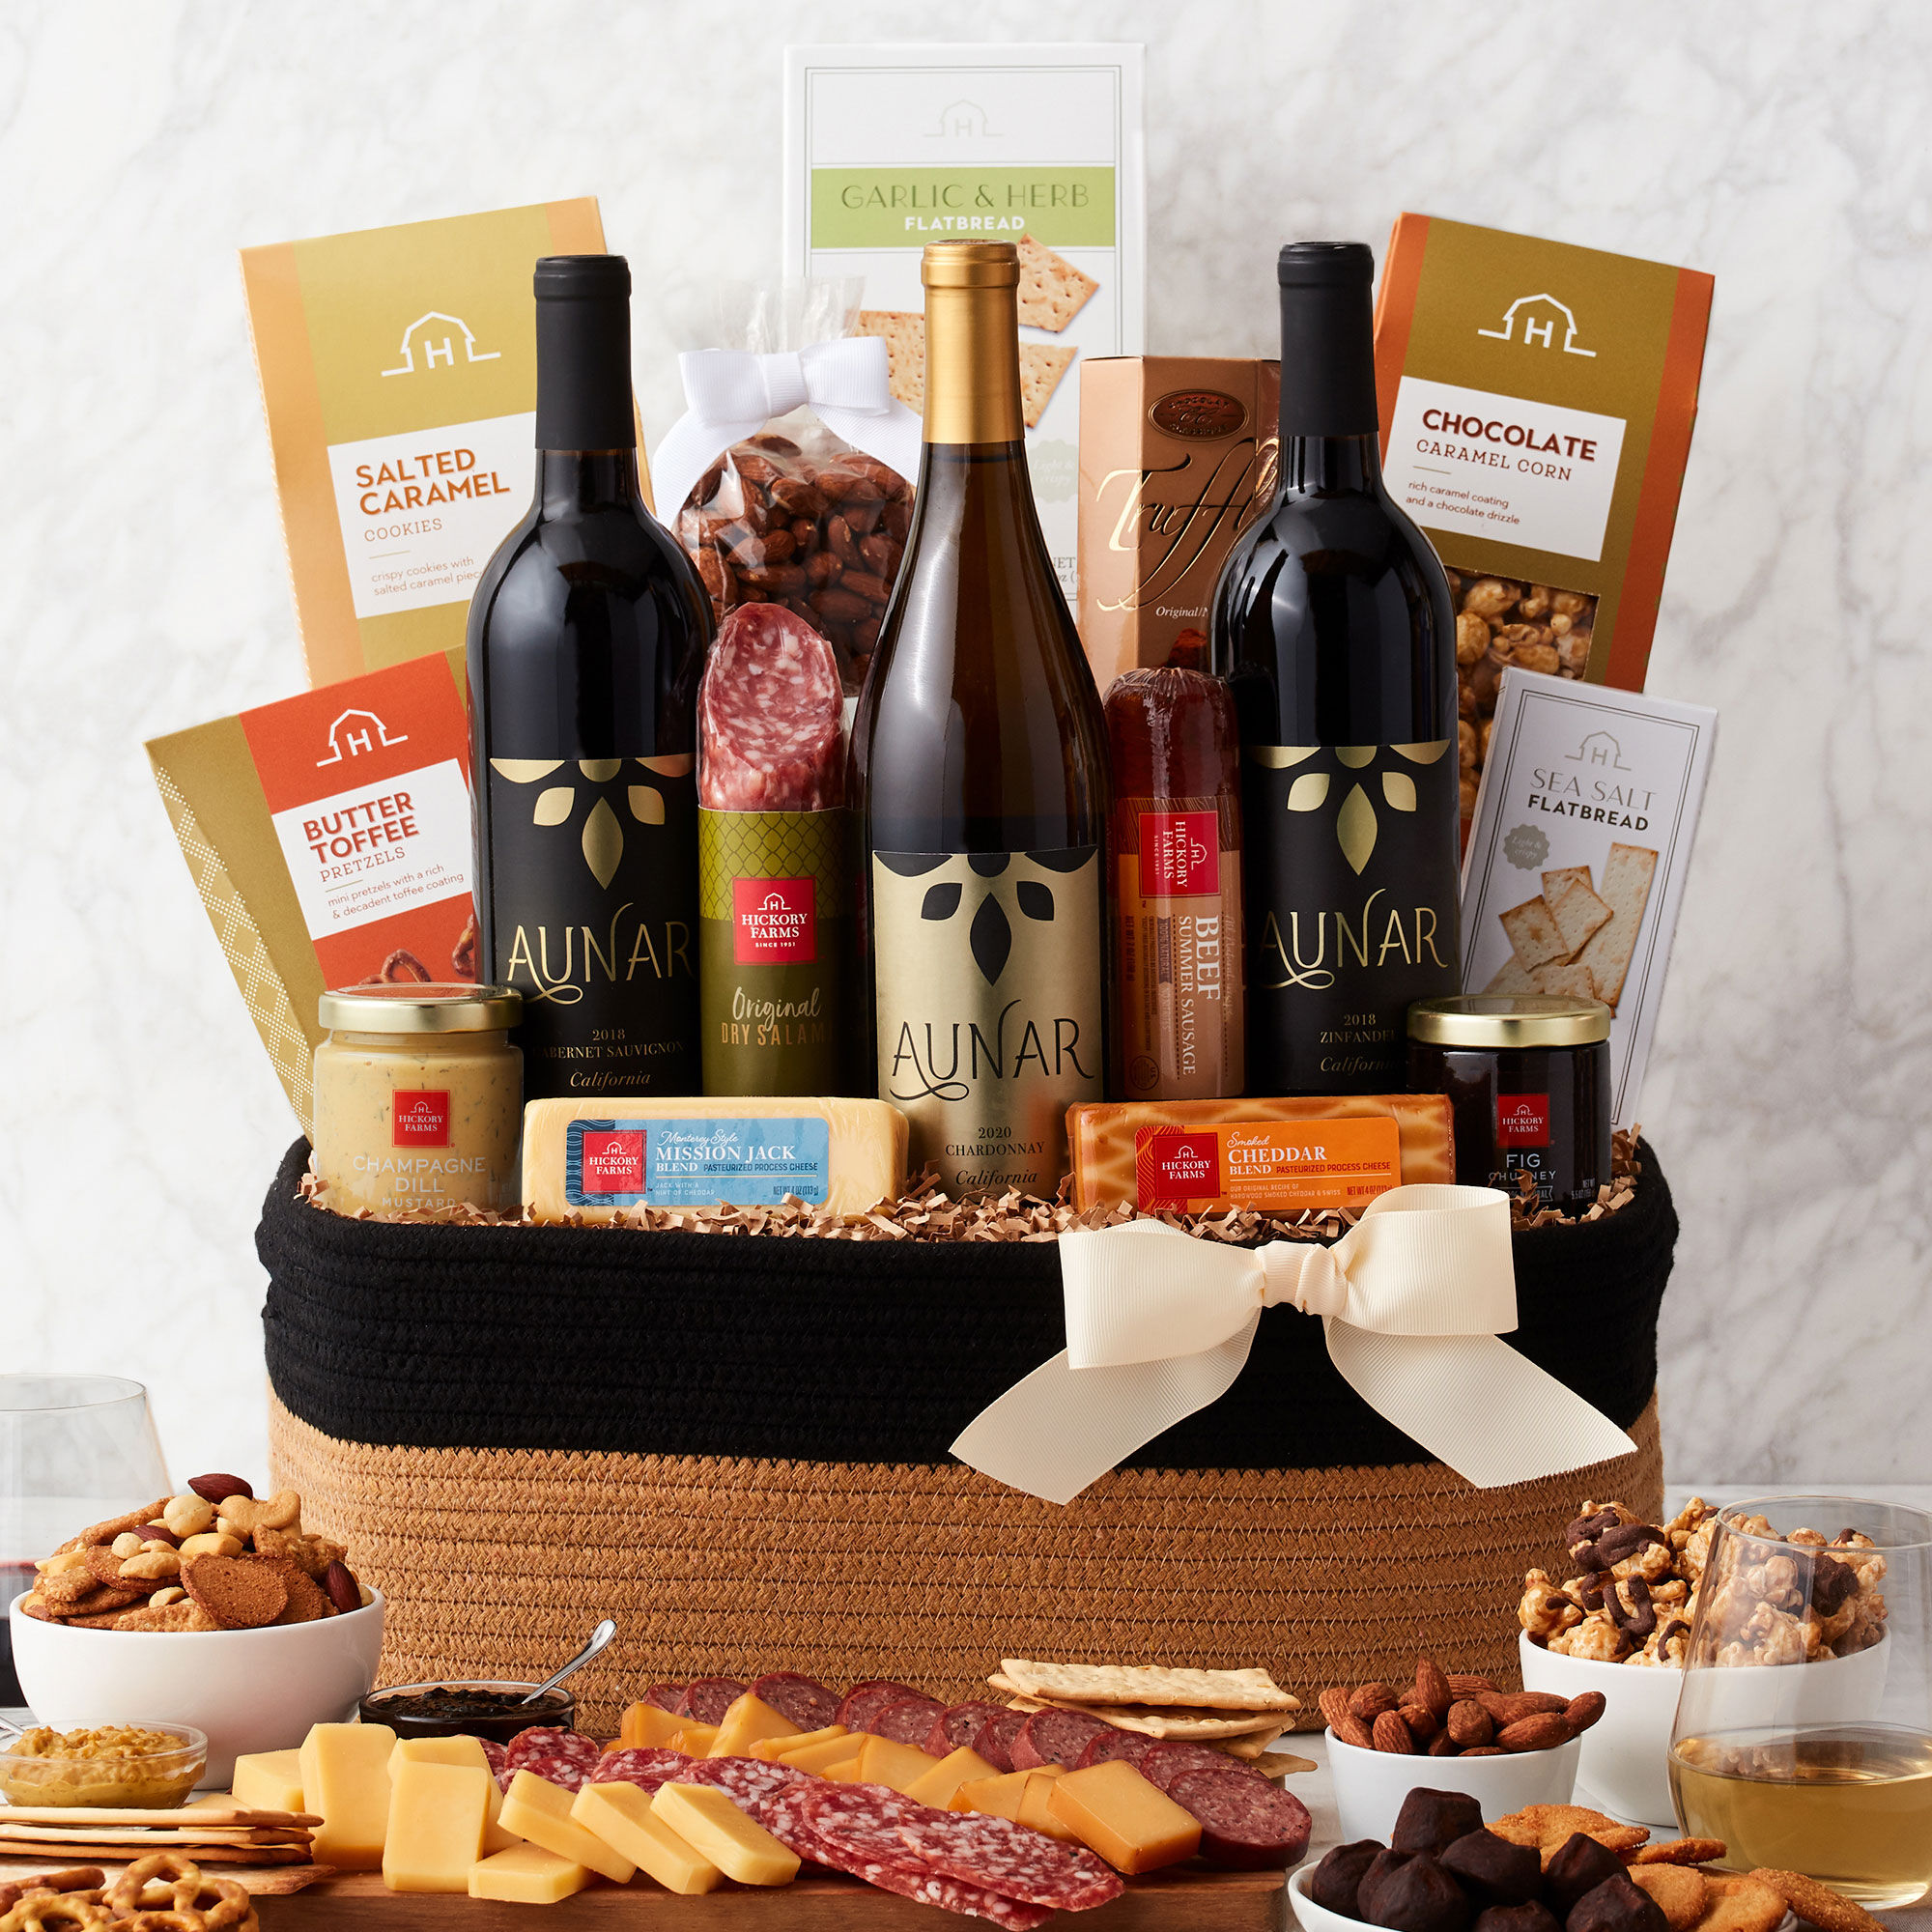 The Royal Treat red & white wine gift basket